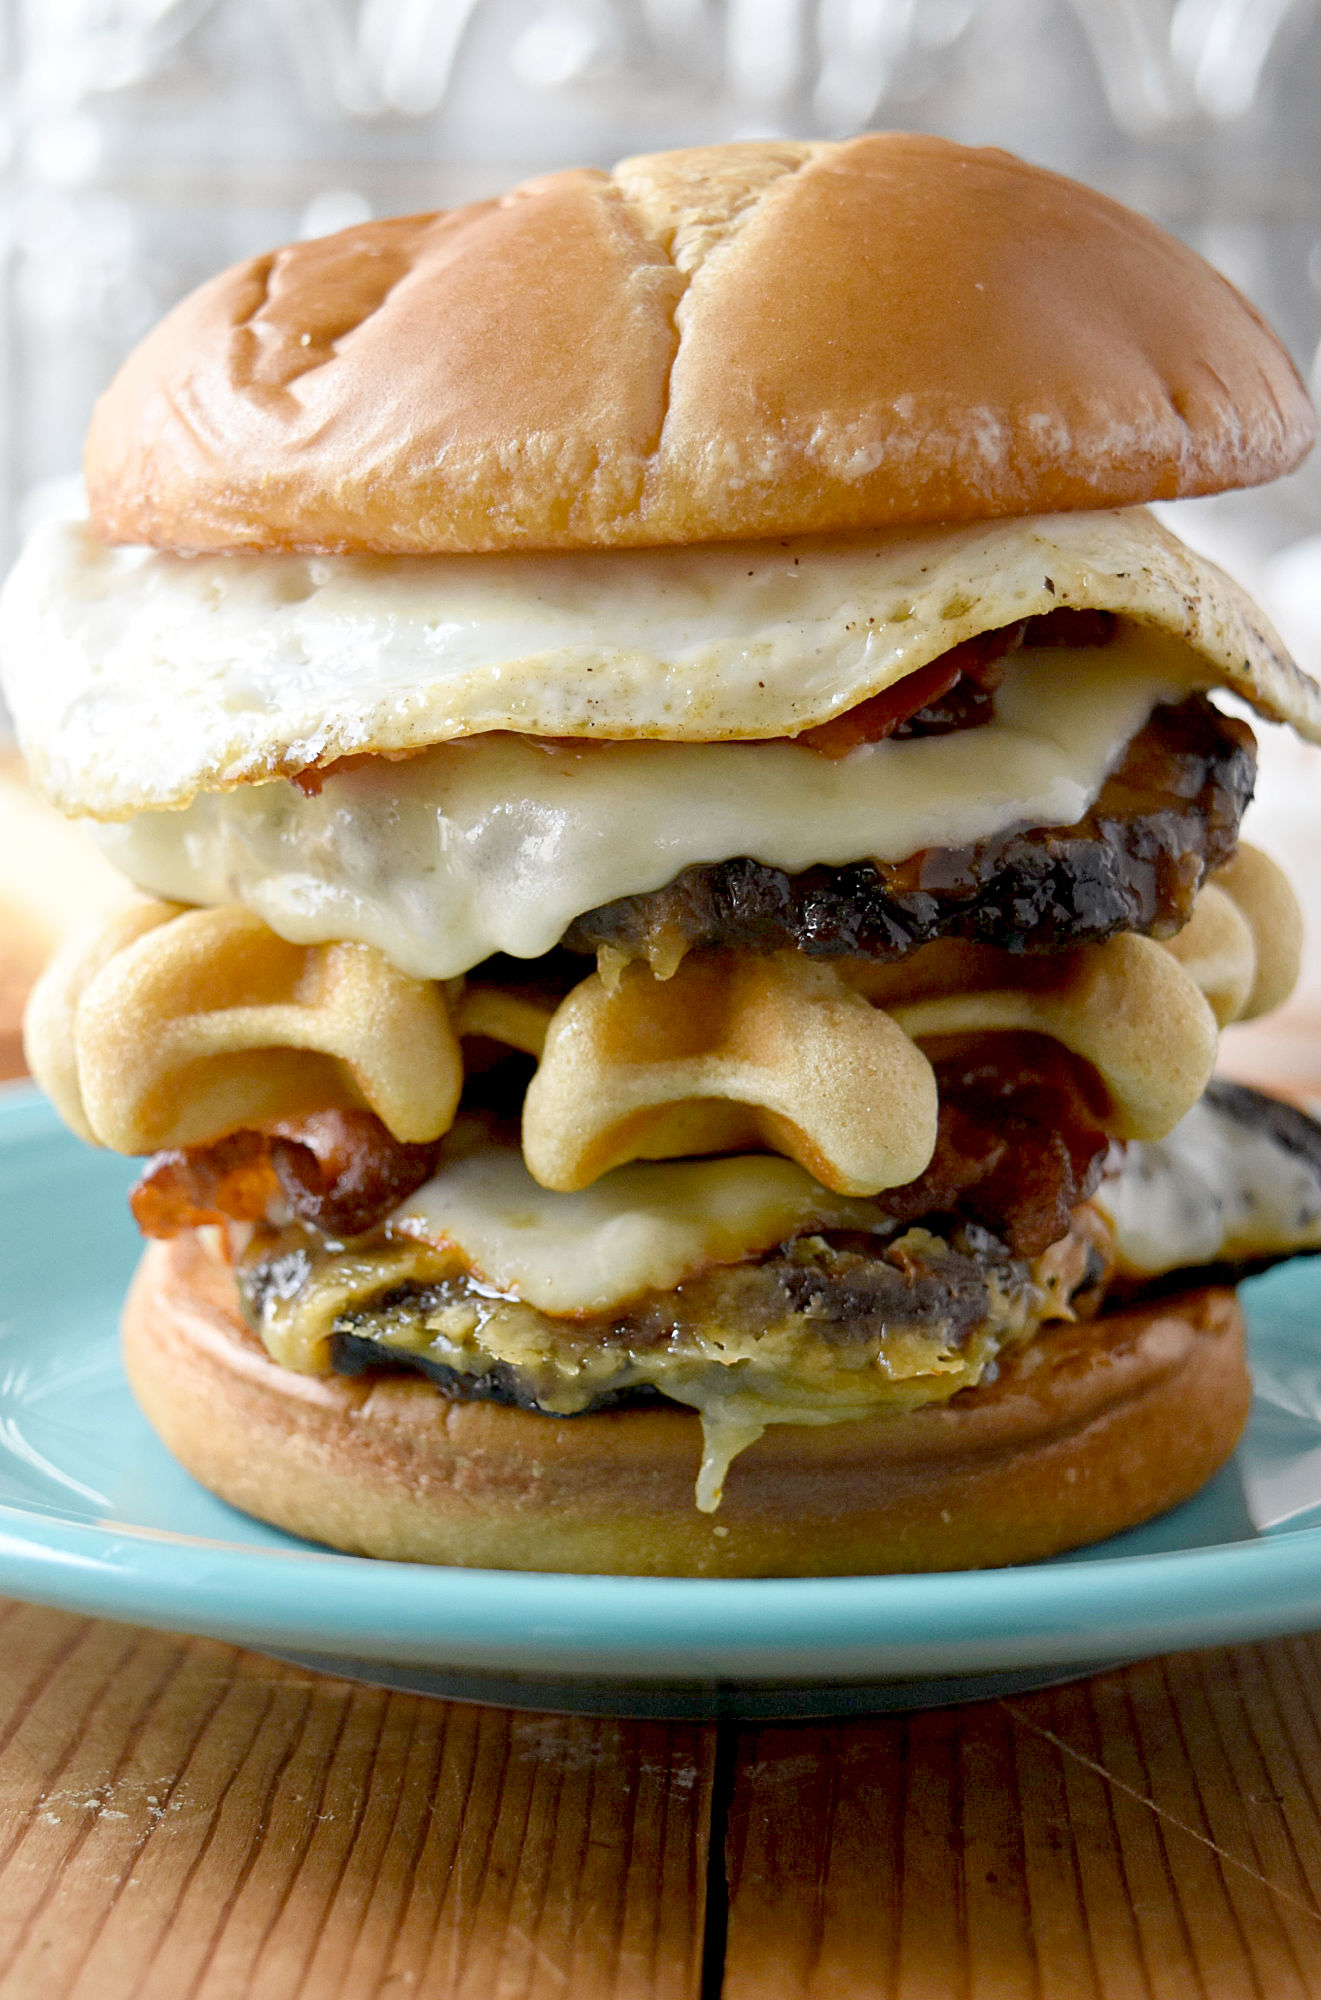 Double Decker Brunch Burger is just that. Brunch on a bun. It starts with two smashed patties topped with cheese. The top layer has a fried egg and bacon and there’s a waffle in the middle making it an epic double decker burger. #BurgerMonth